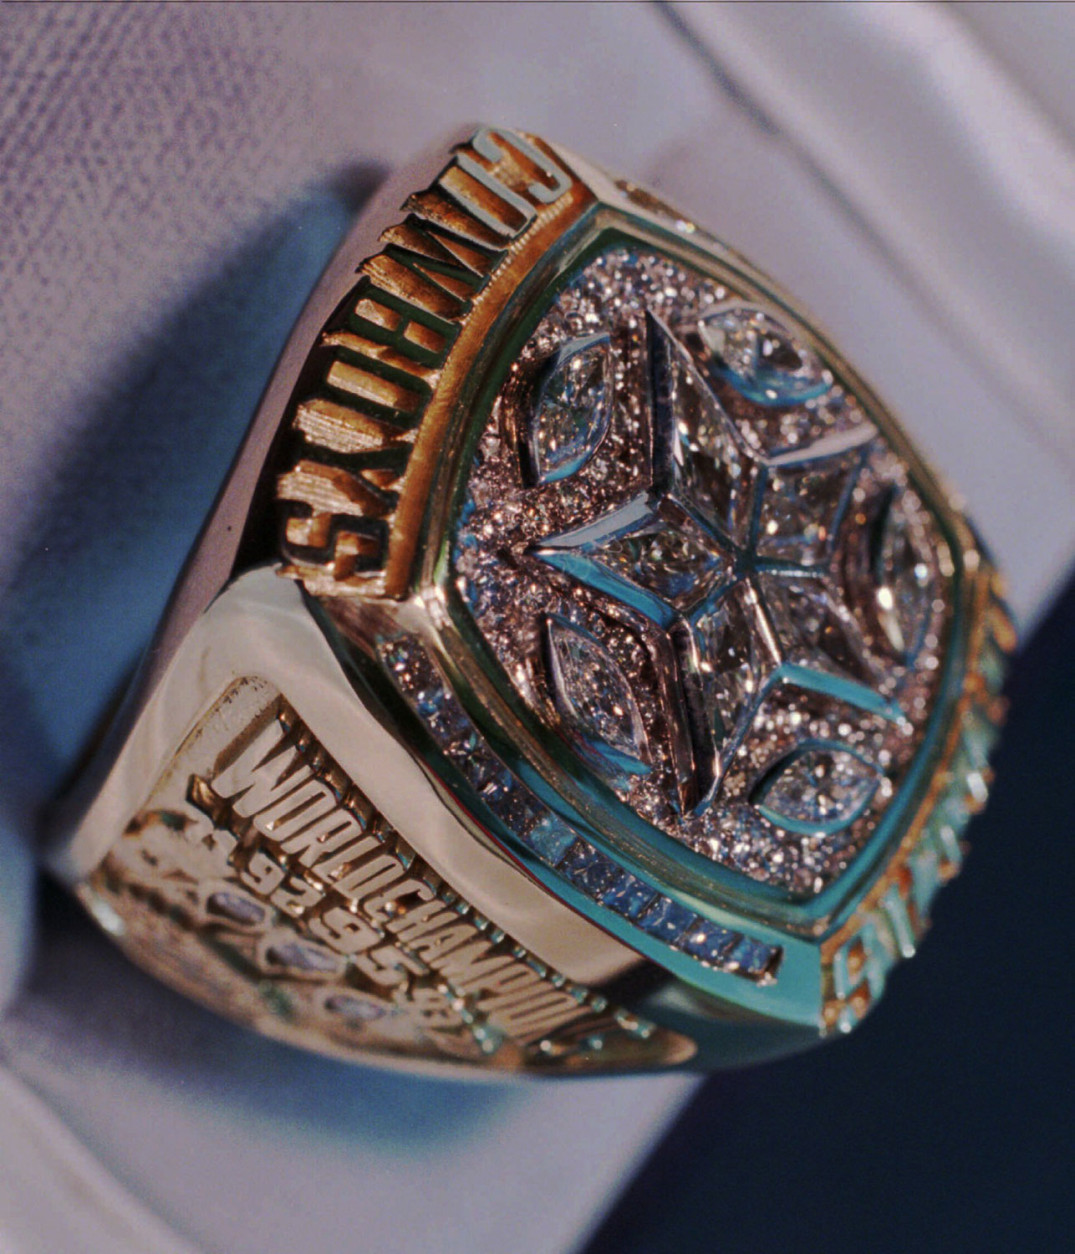 The Dallas Cowboys' Super Bowl ring from 1996 seems tame compared to more gaudy, modern versions. (AP Photo/Eric Gay)